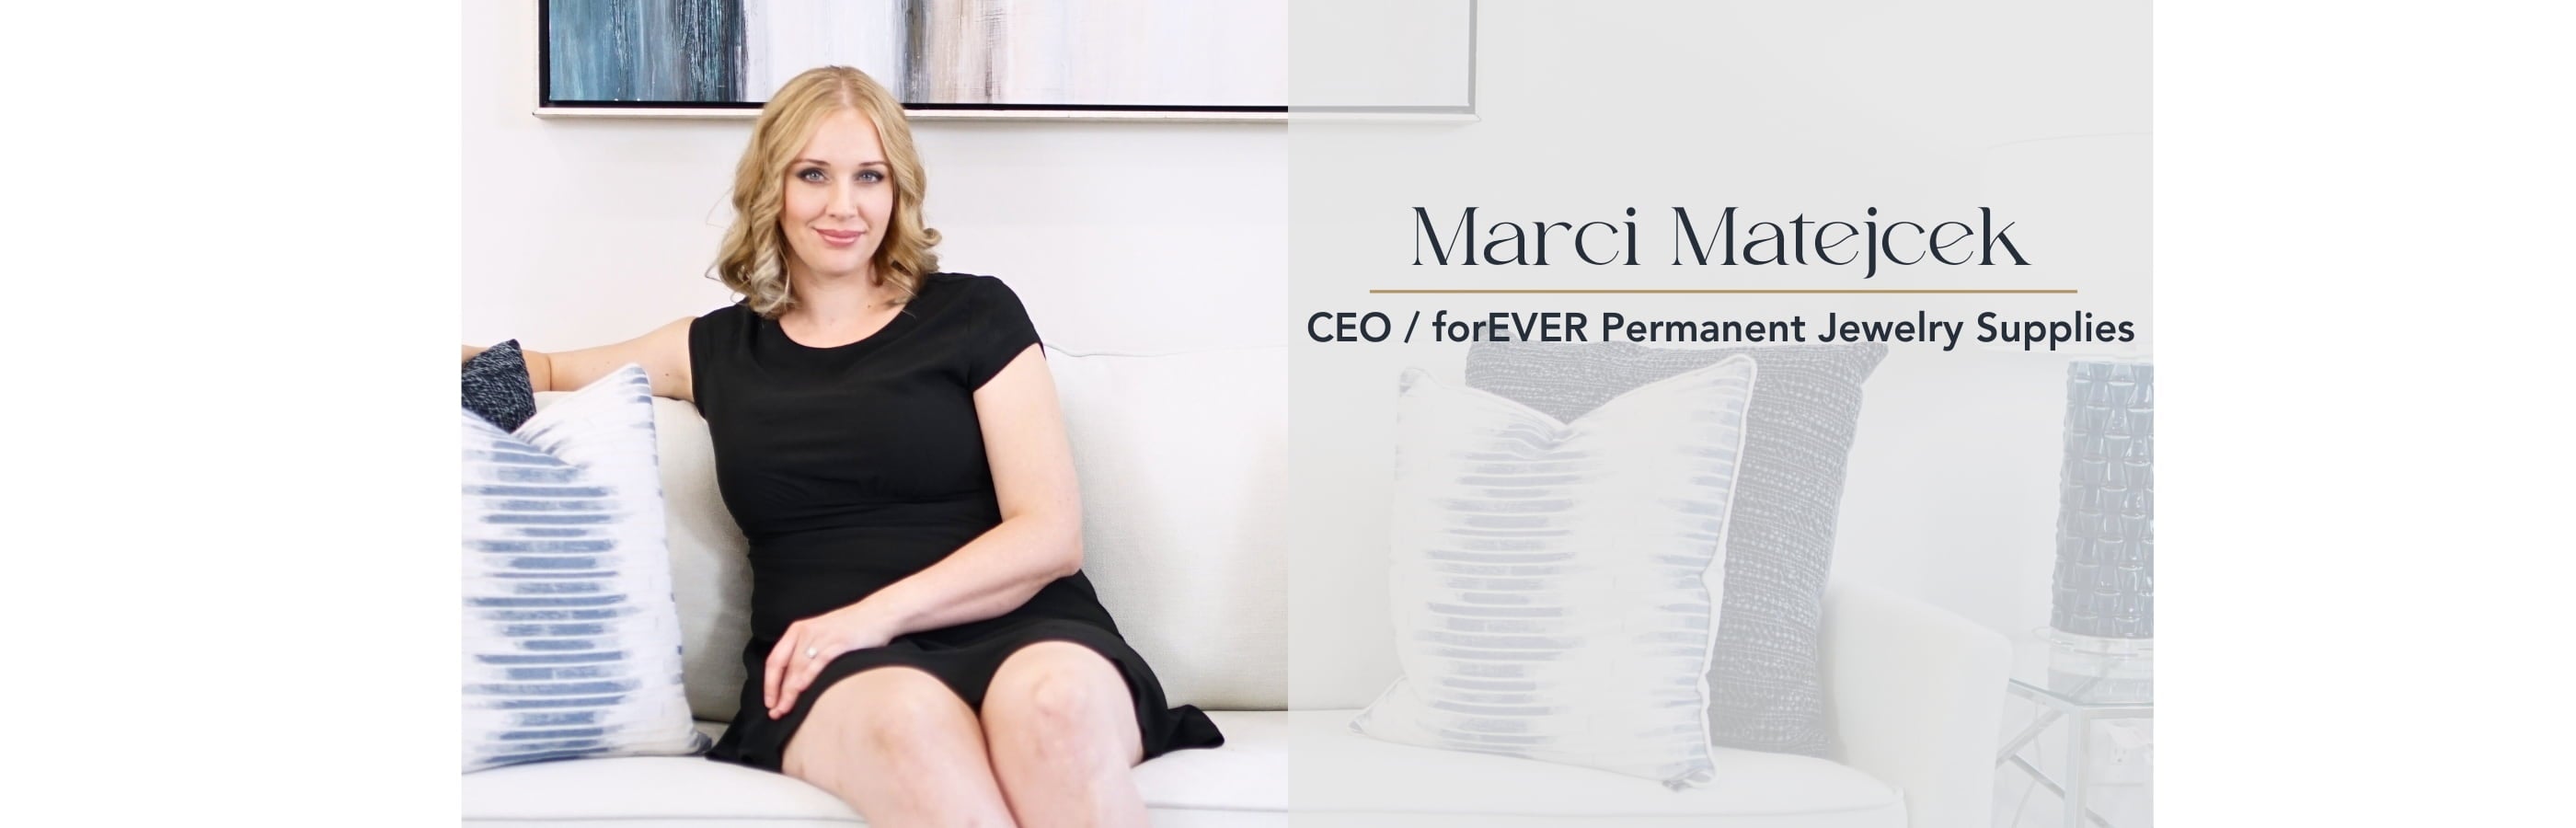 Marci Matejcek, founder & CEO of forEVER Permanent Jewelry & The forEVER Jewelry.